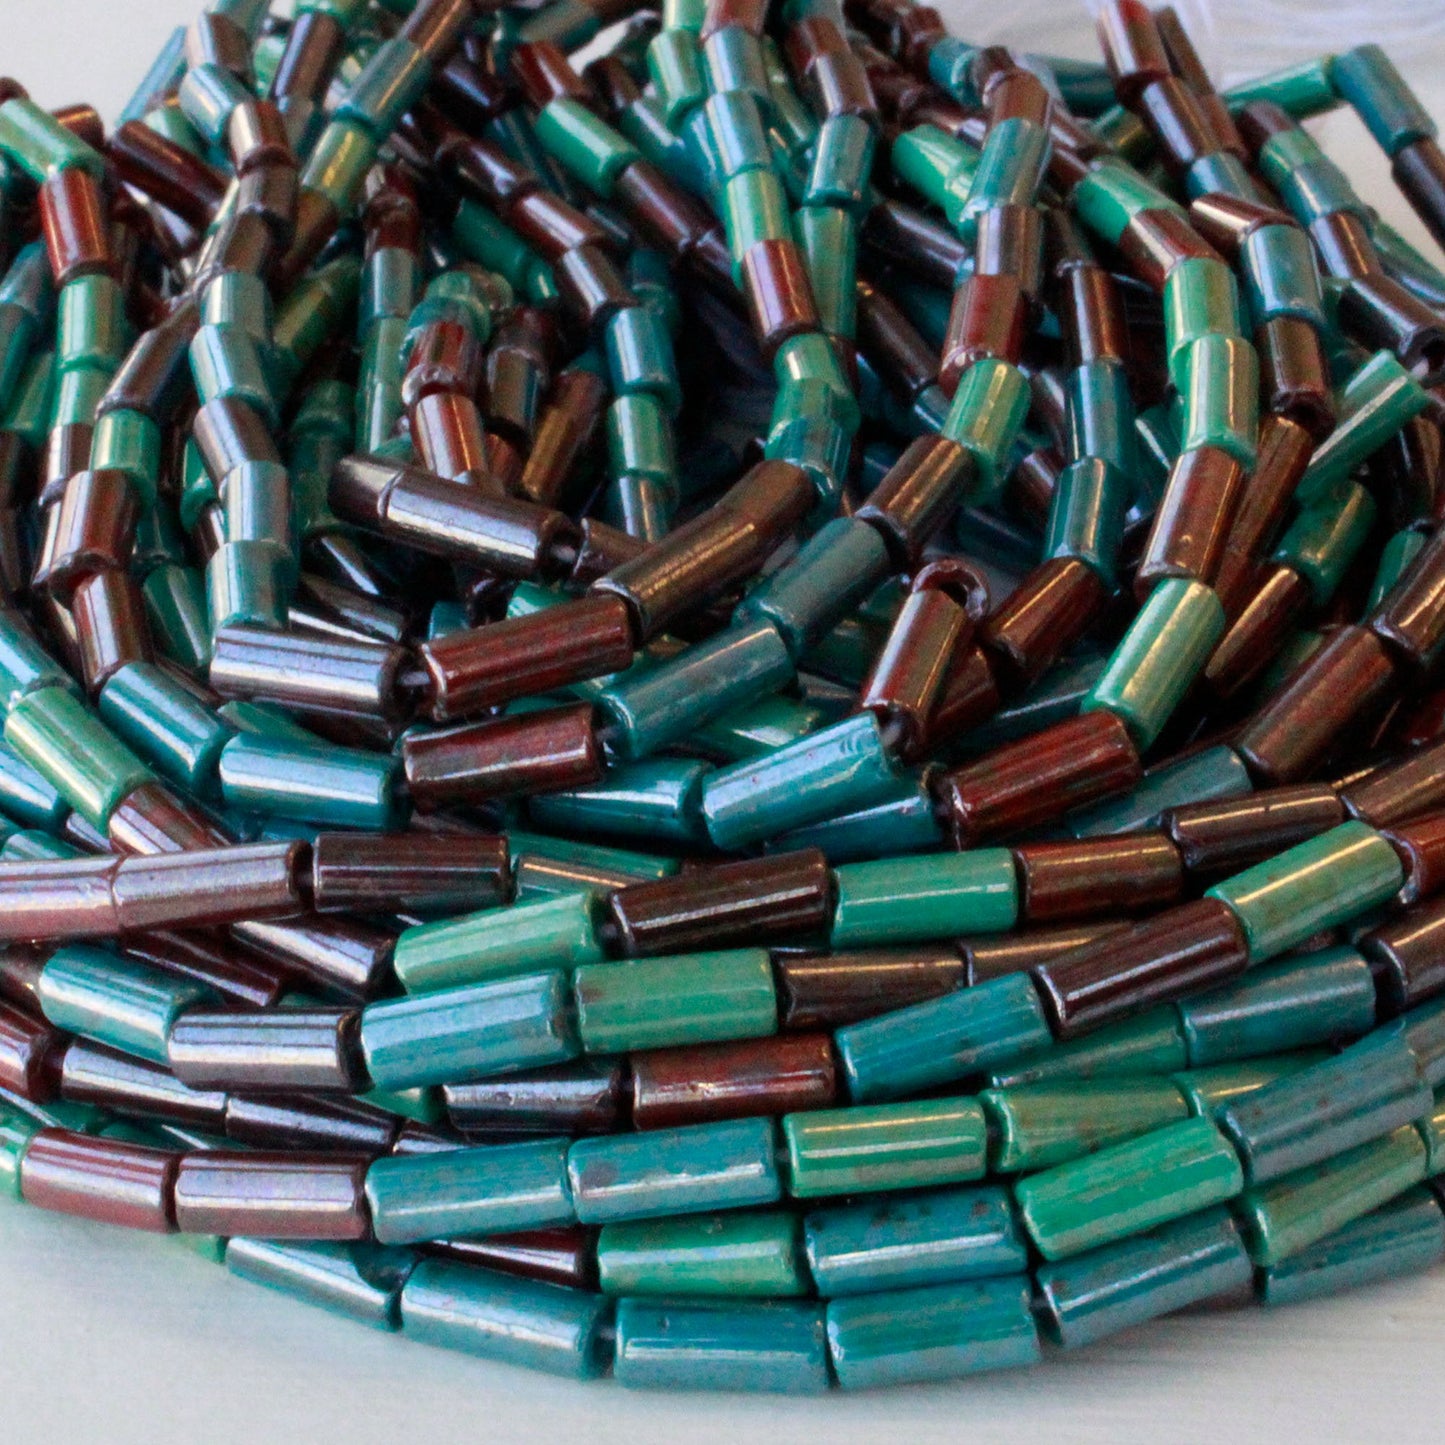 9x4mm Glass Tube Beads - Blue/Green/Red - 20 or 60 Inches